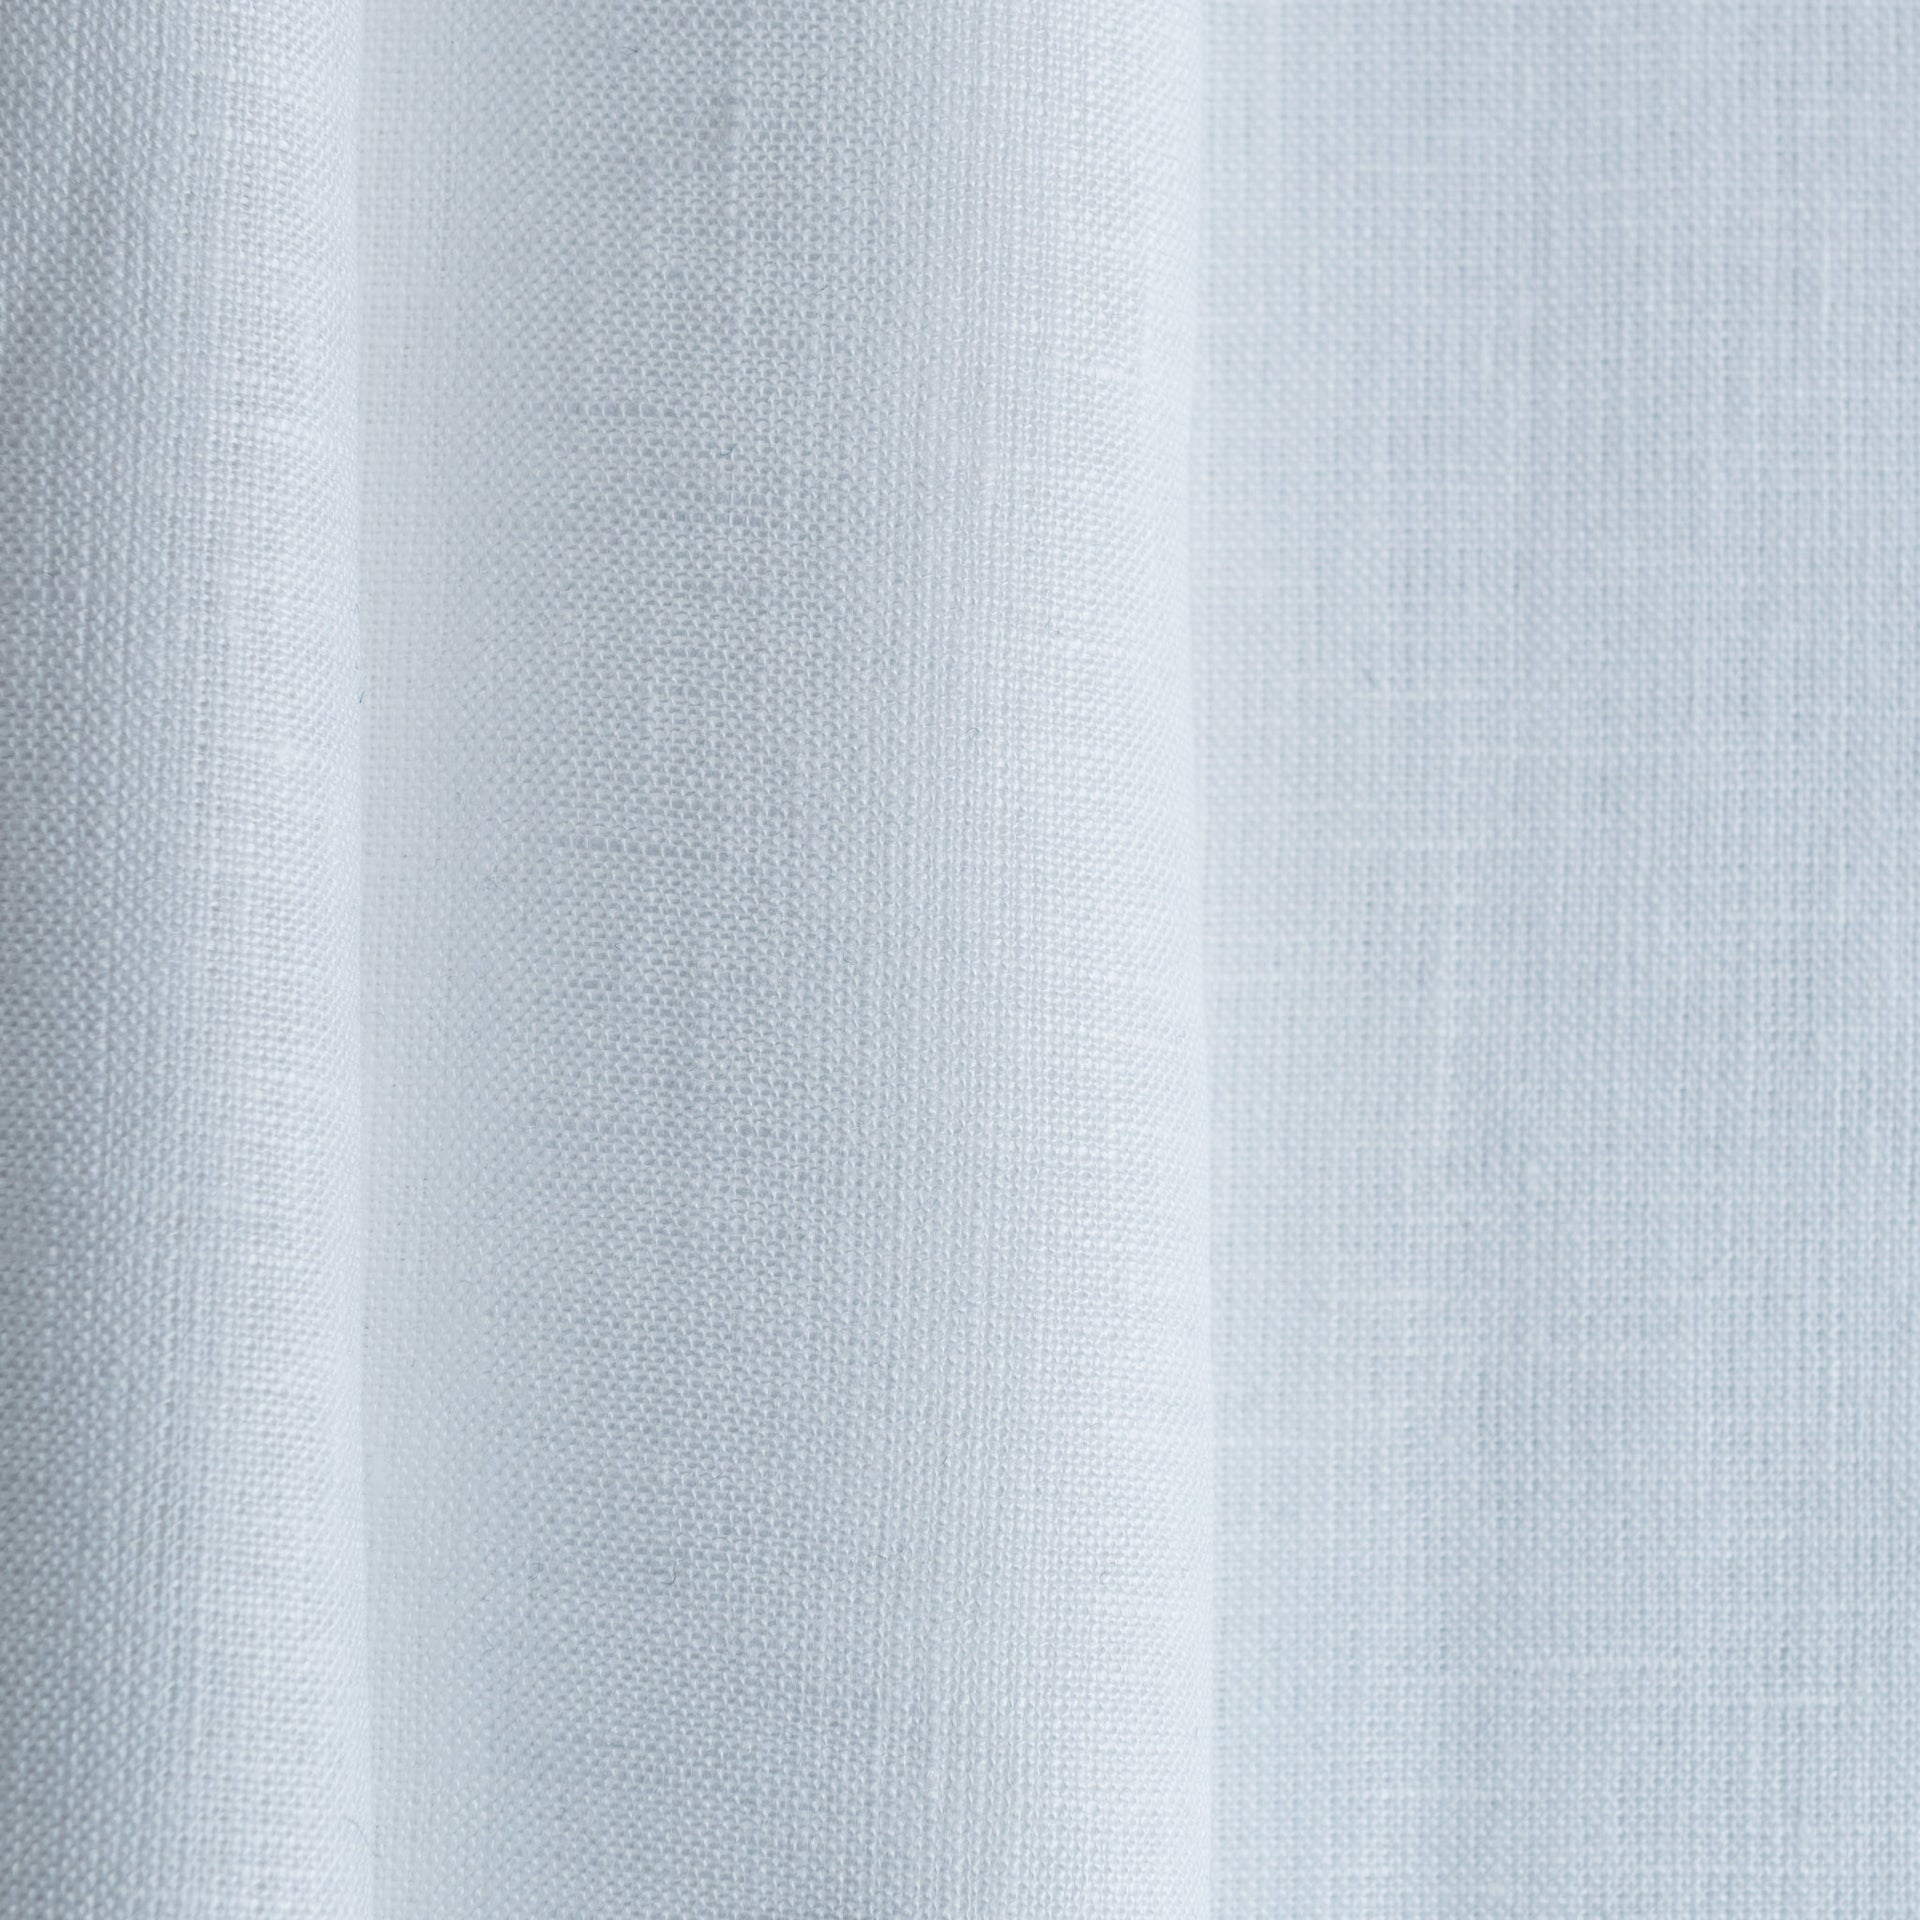 Colour Block Linen Curtain with Cotton Lining - Tab Top Panel in Two Colours - Window or Door Drapes in Custom Size, Color: White